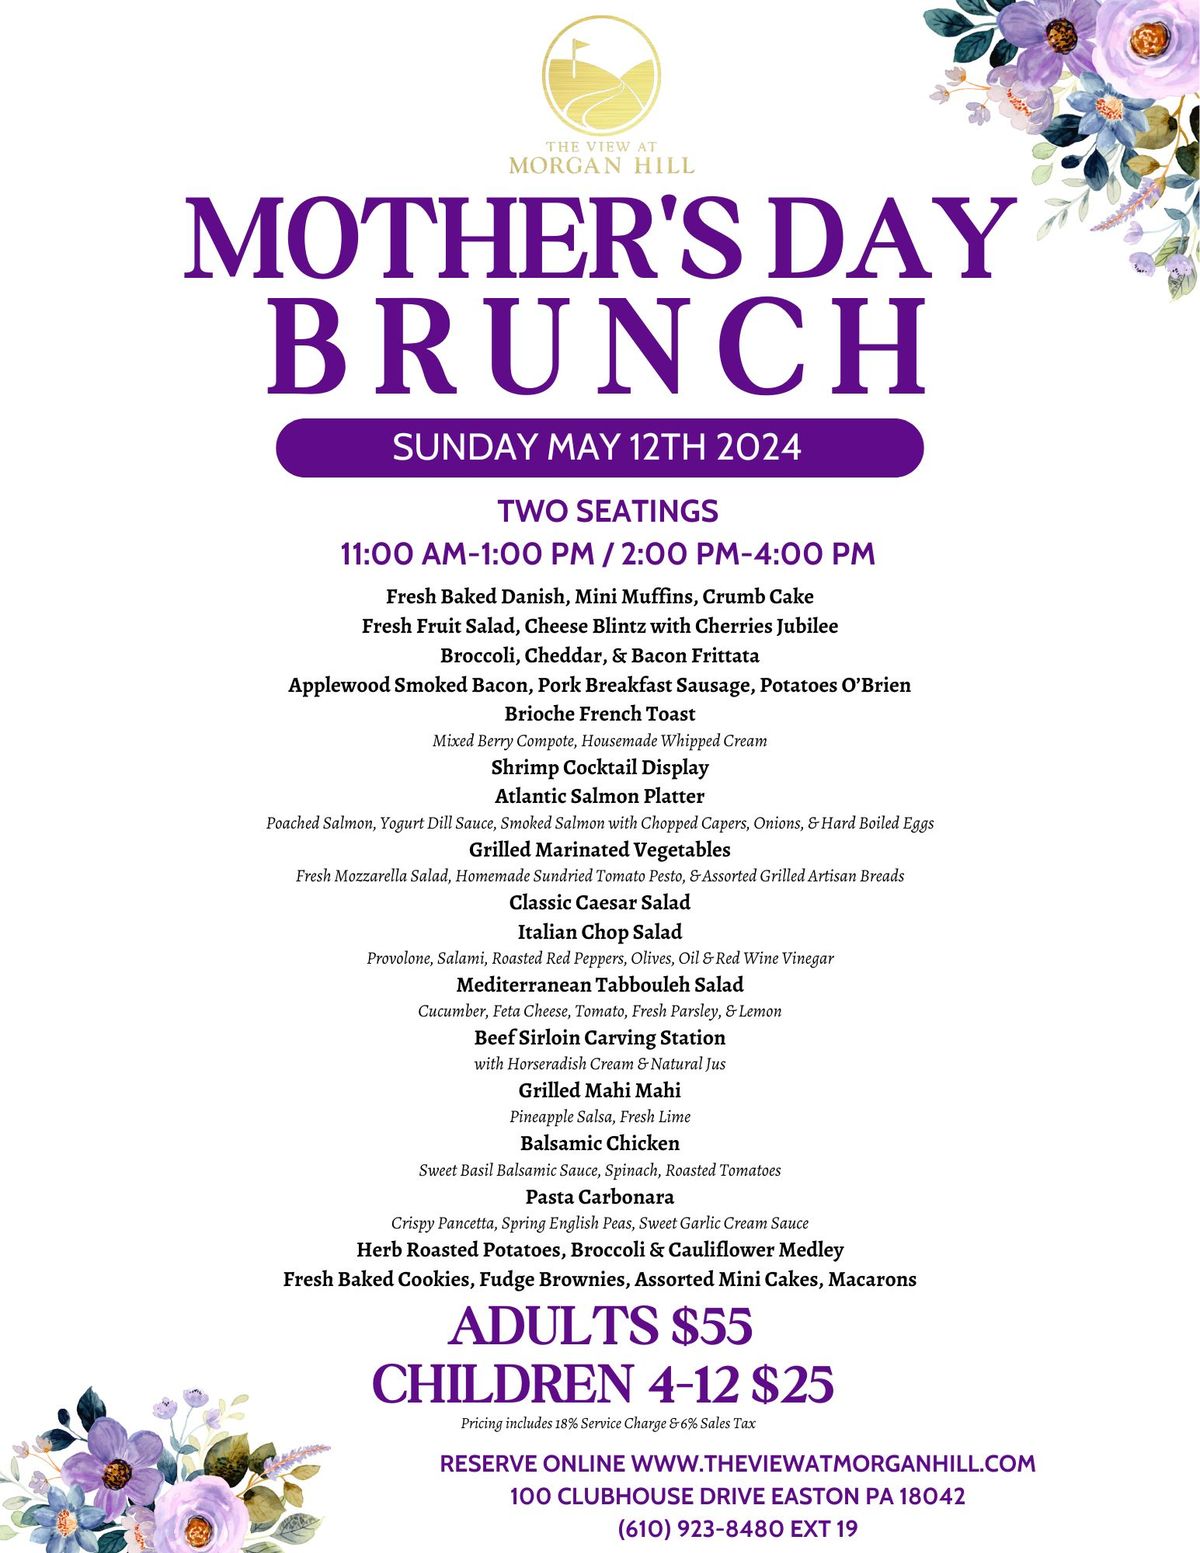 Mother's Day Brunch 2:00 PM-4:00 PM Seating